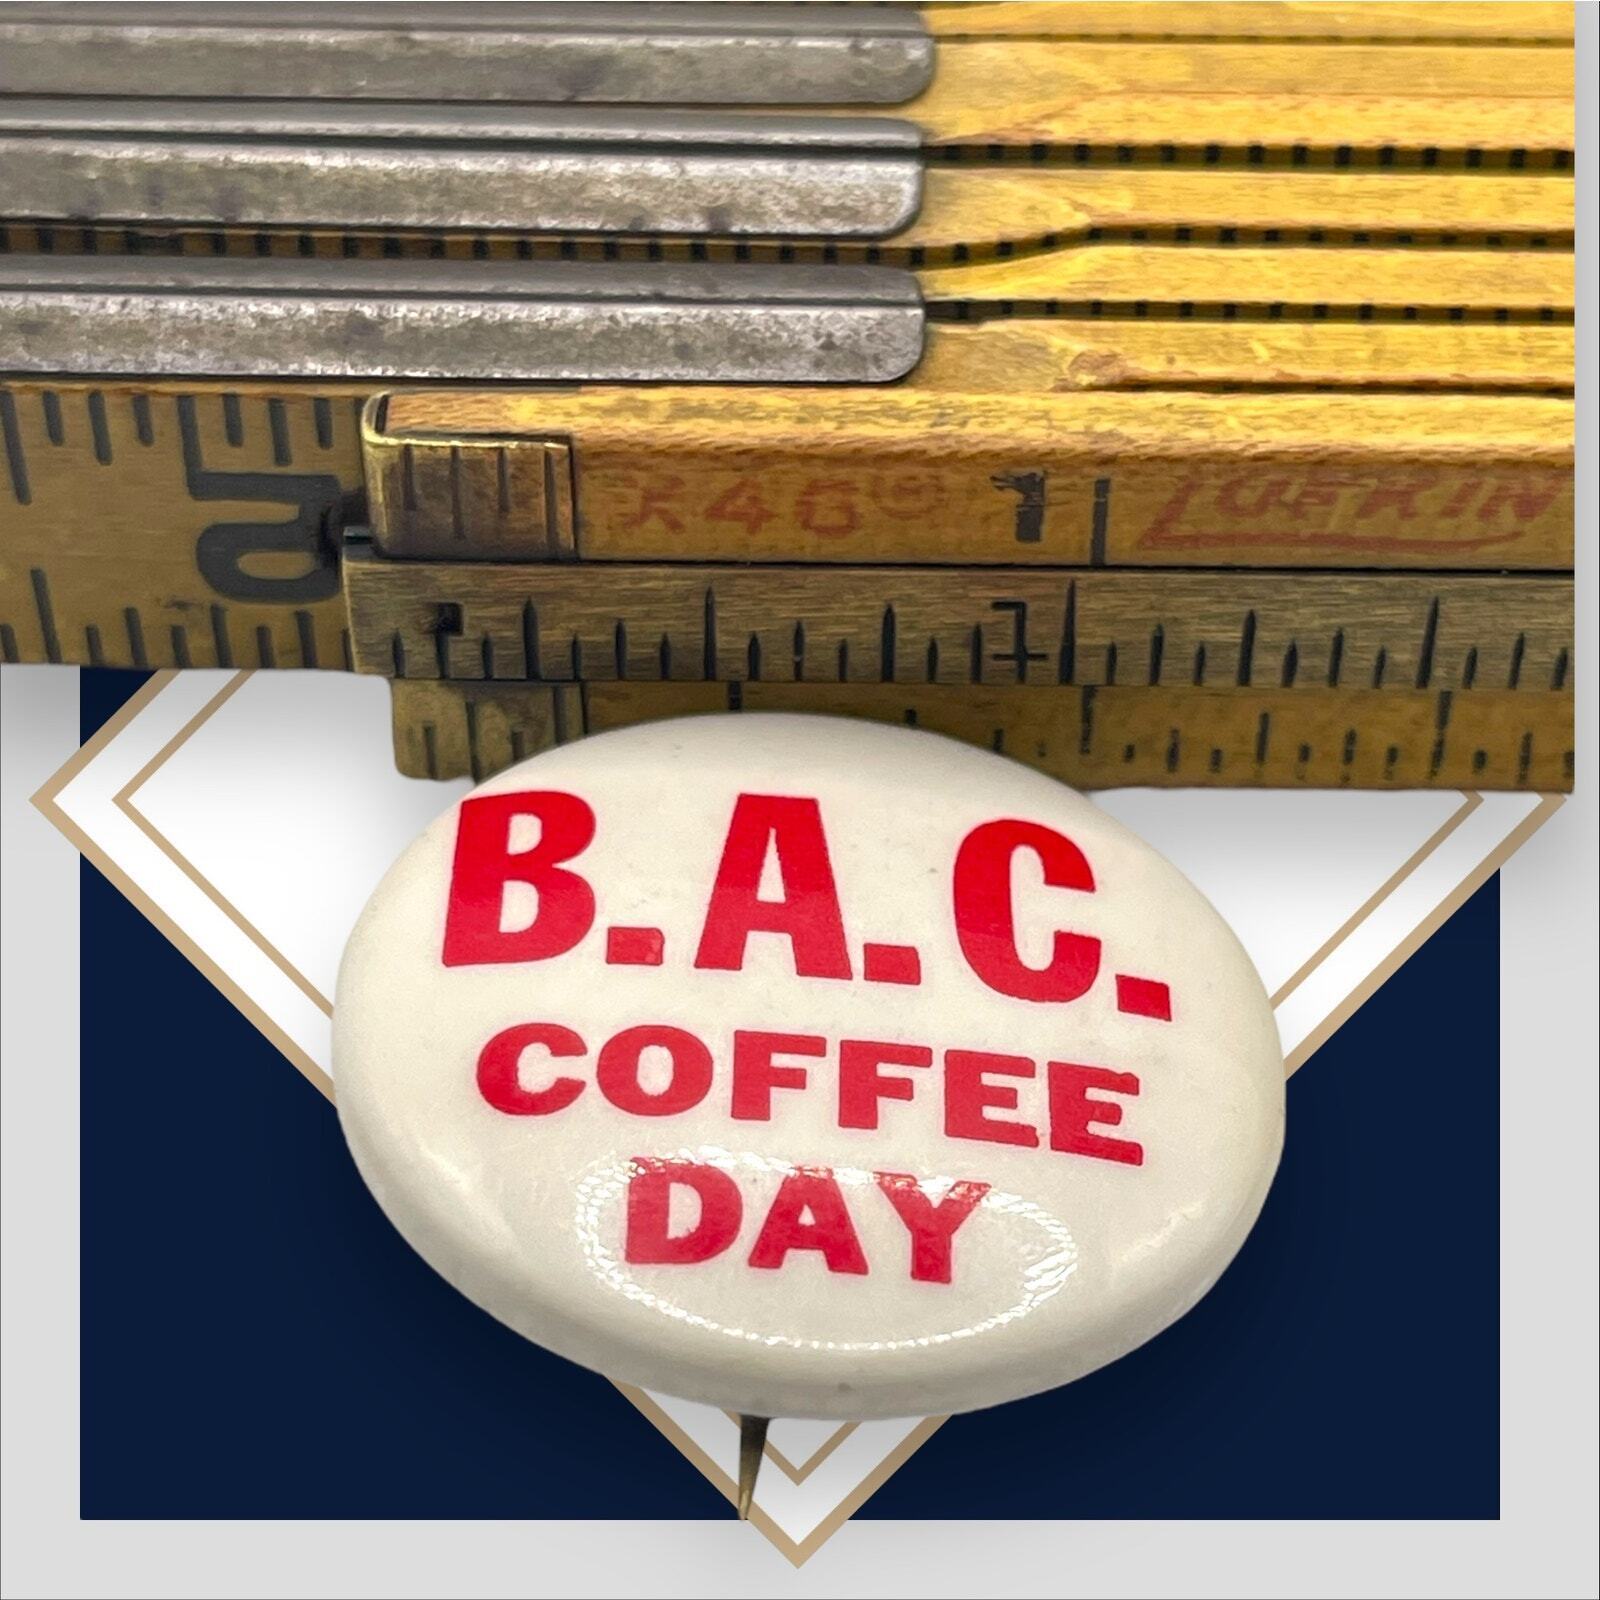 Vintage B.A.C. Coffee Day Red & White Pinback Button ~ Buck A Cup Day